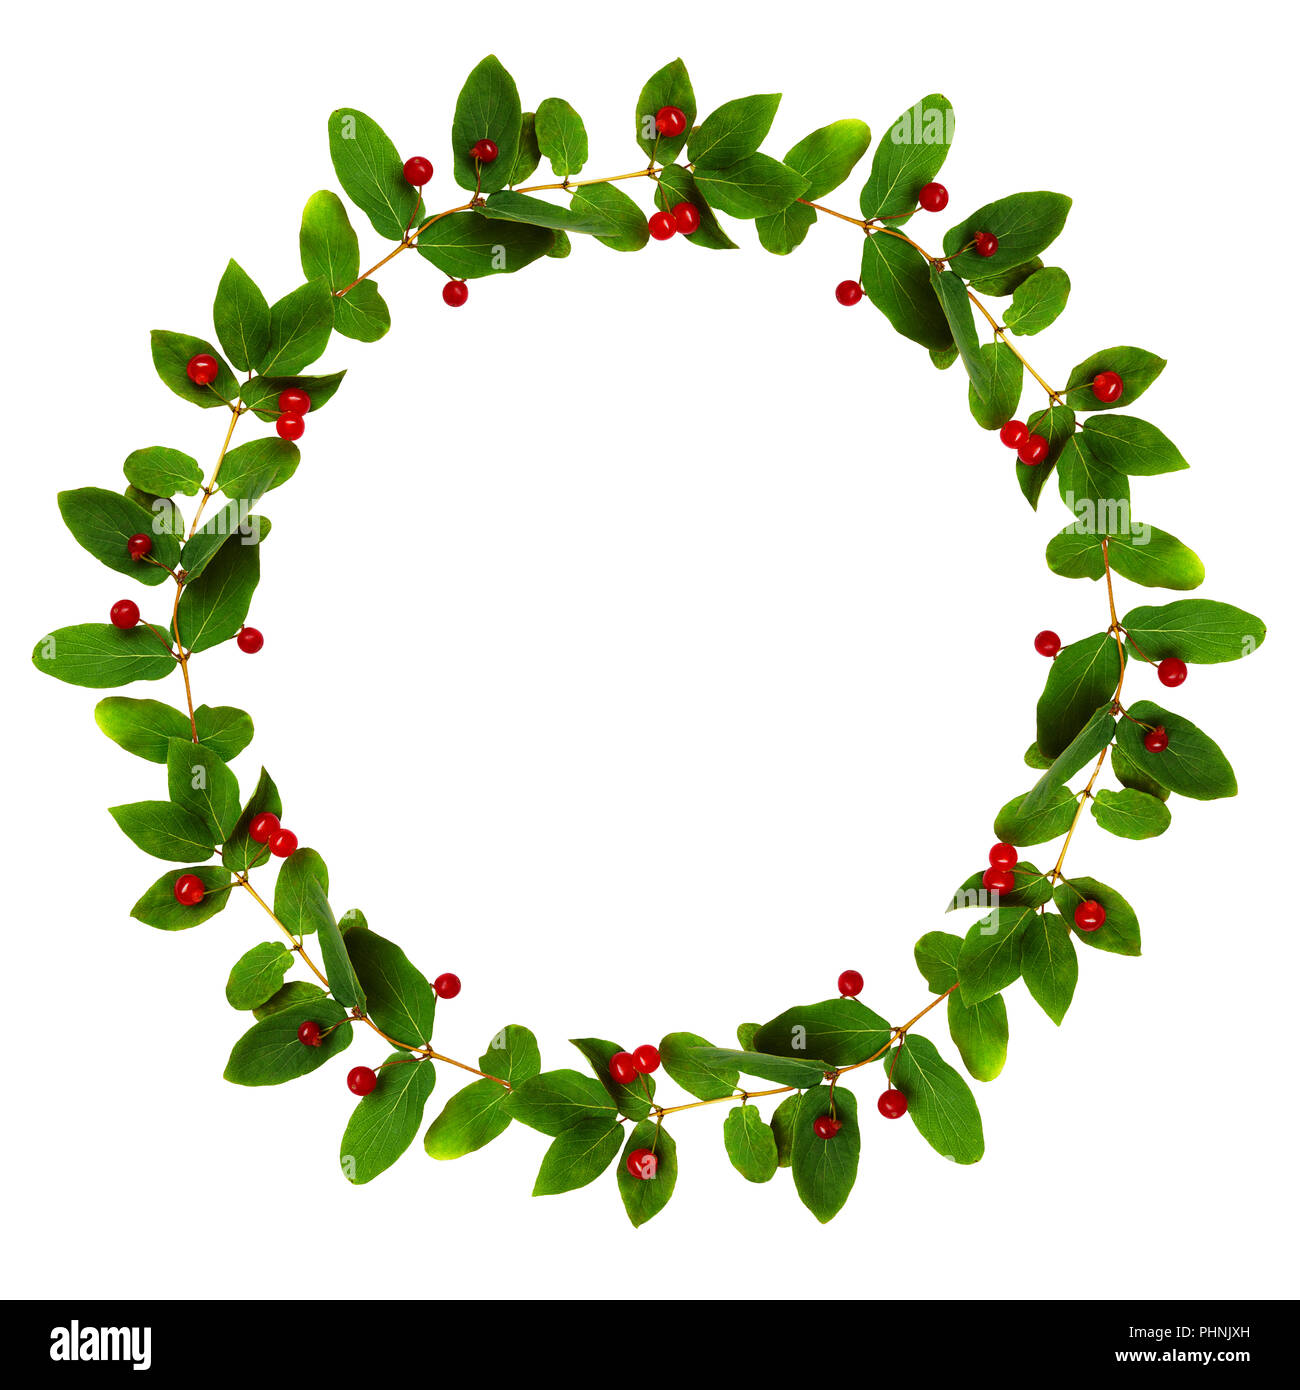 Twigs with green leaves and red berries of Lonicera tatarica in a round wreath isolated on white background. Flat lay. Top view. Stock Photo